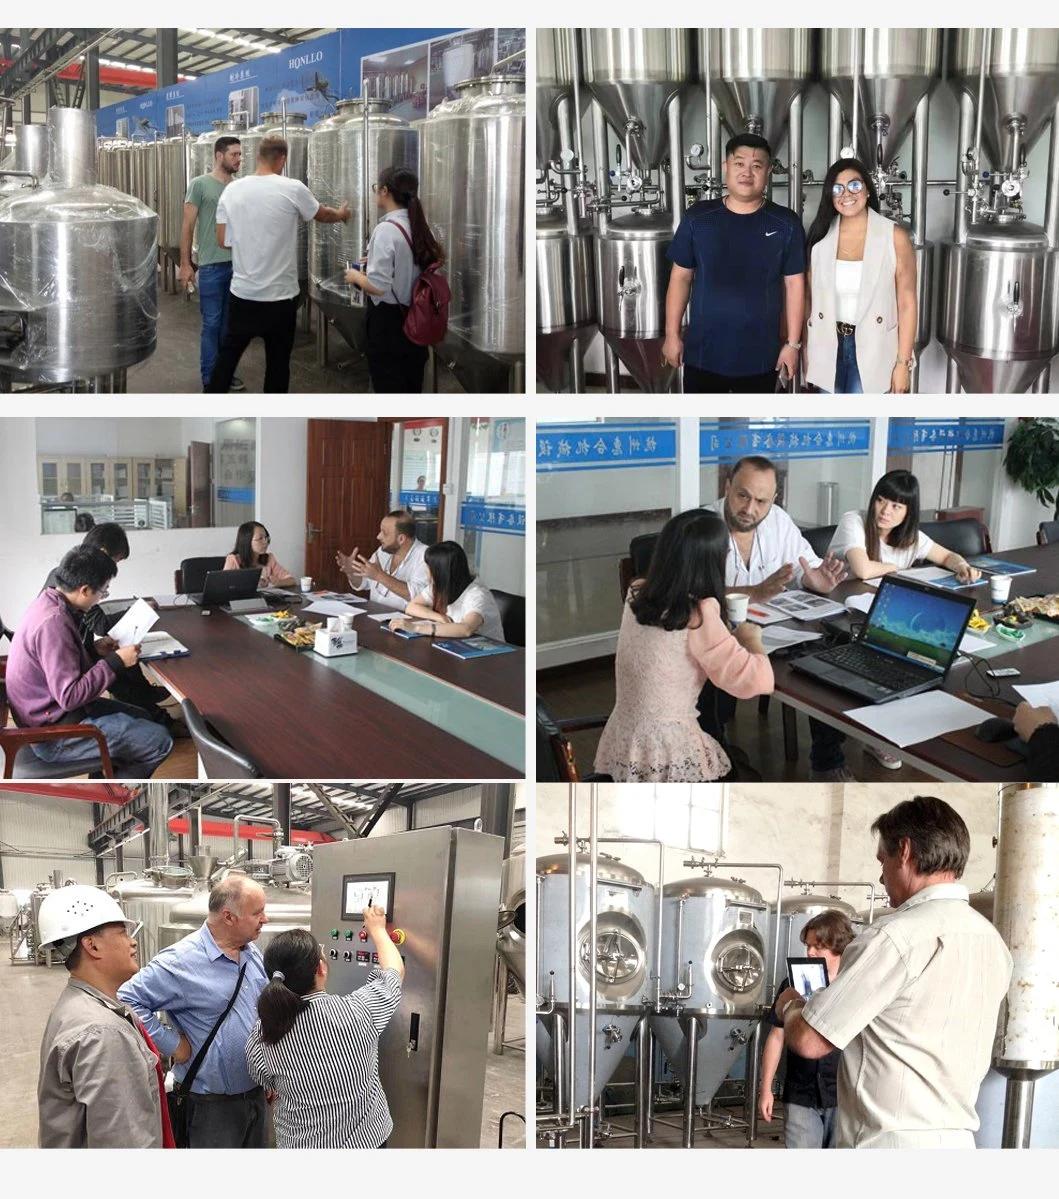 Food Grade Stainless Steel Brewery Equipment with Digital Display Control